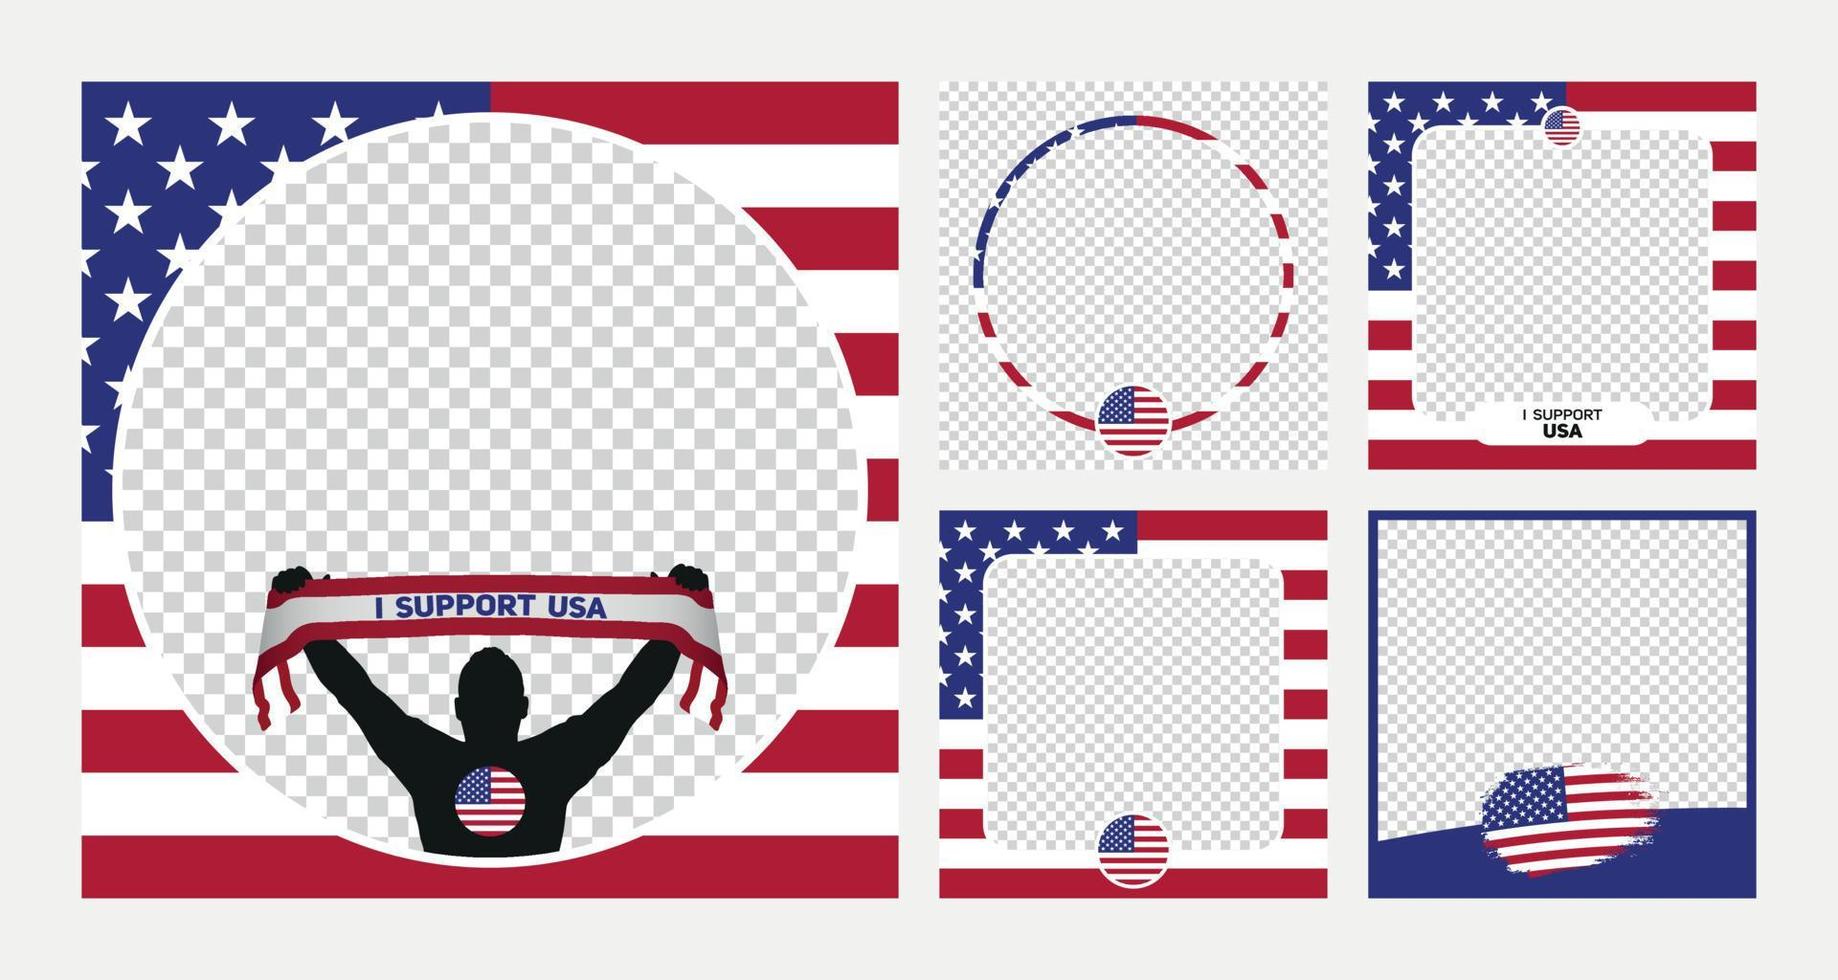 I support USA united states of america world football championship profil picture frame banners for social media vector